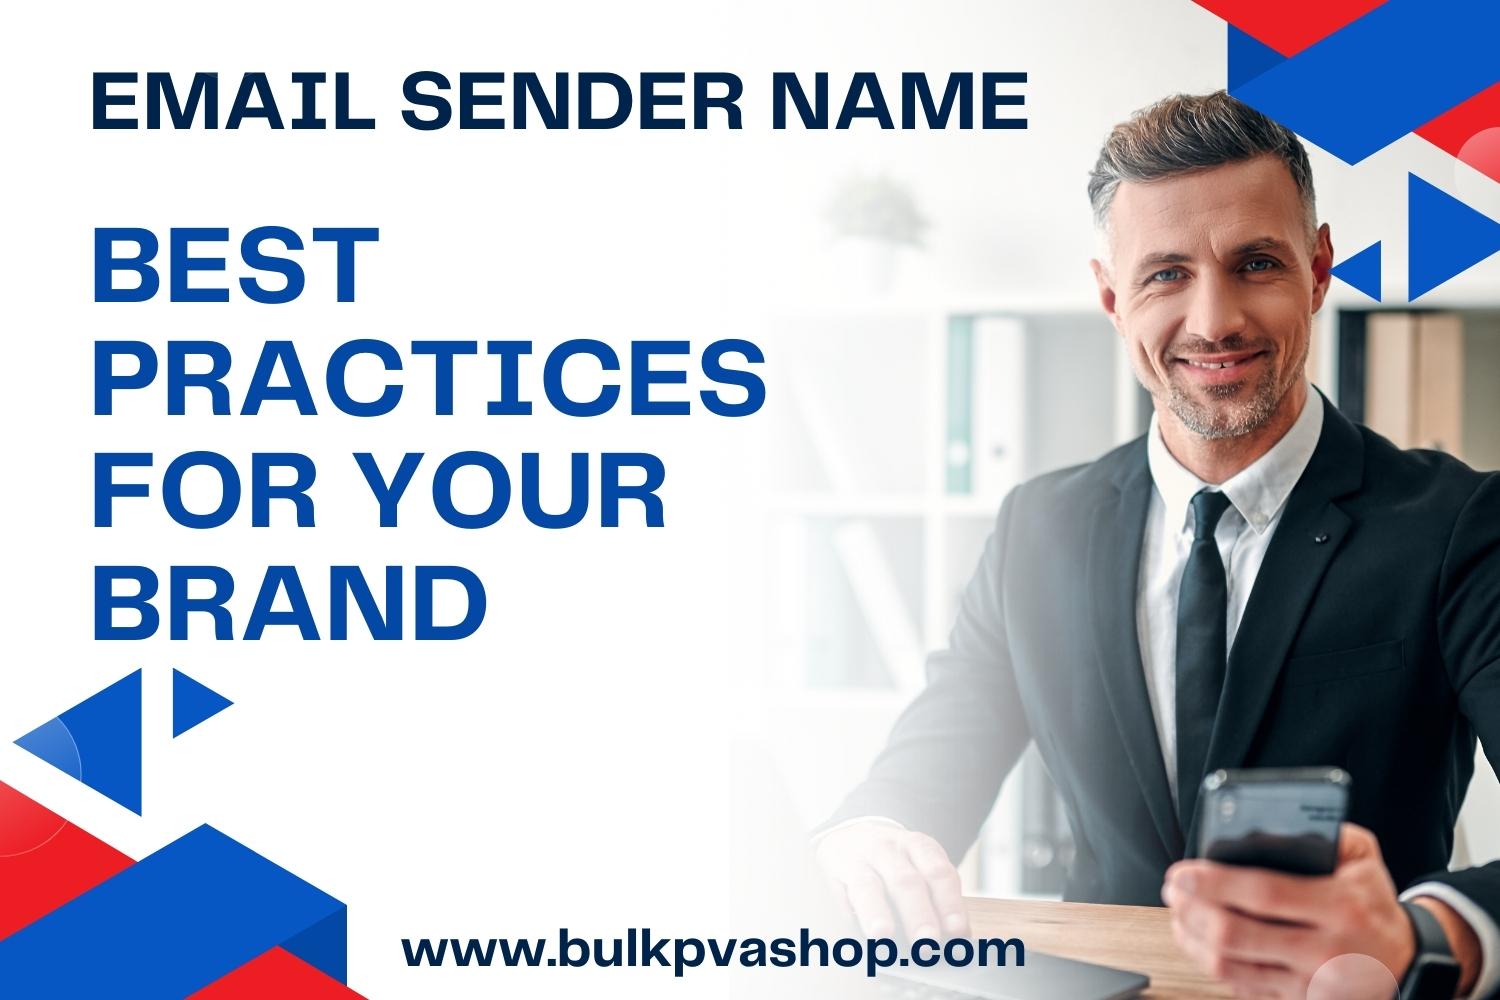 Email Sender Name: Best Practices For Your Brand